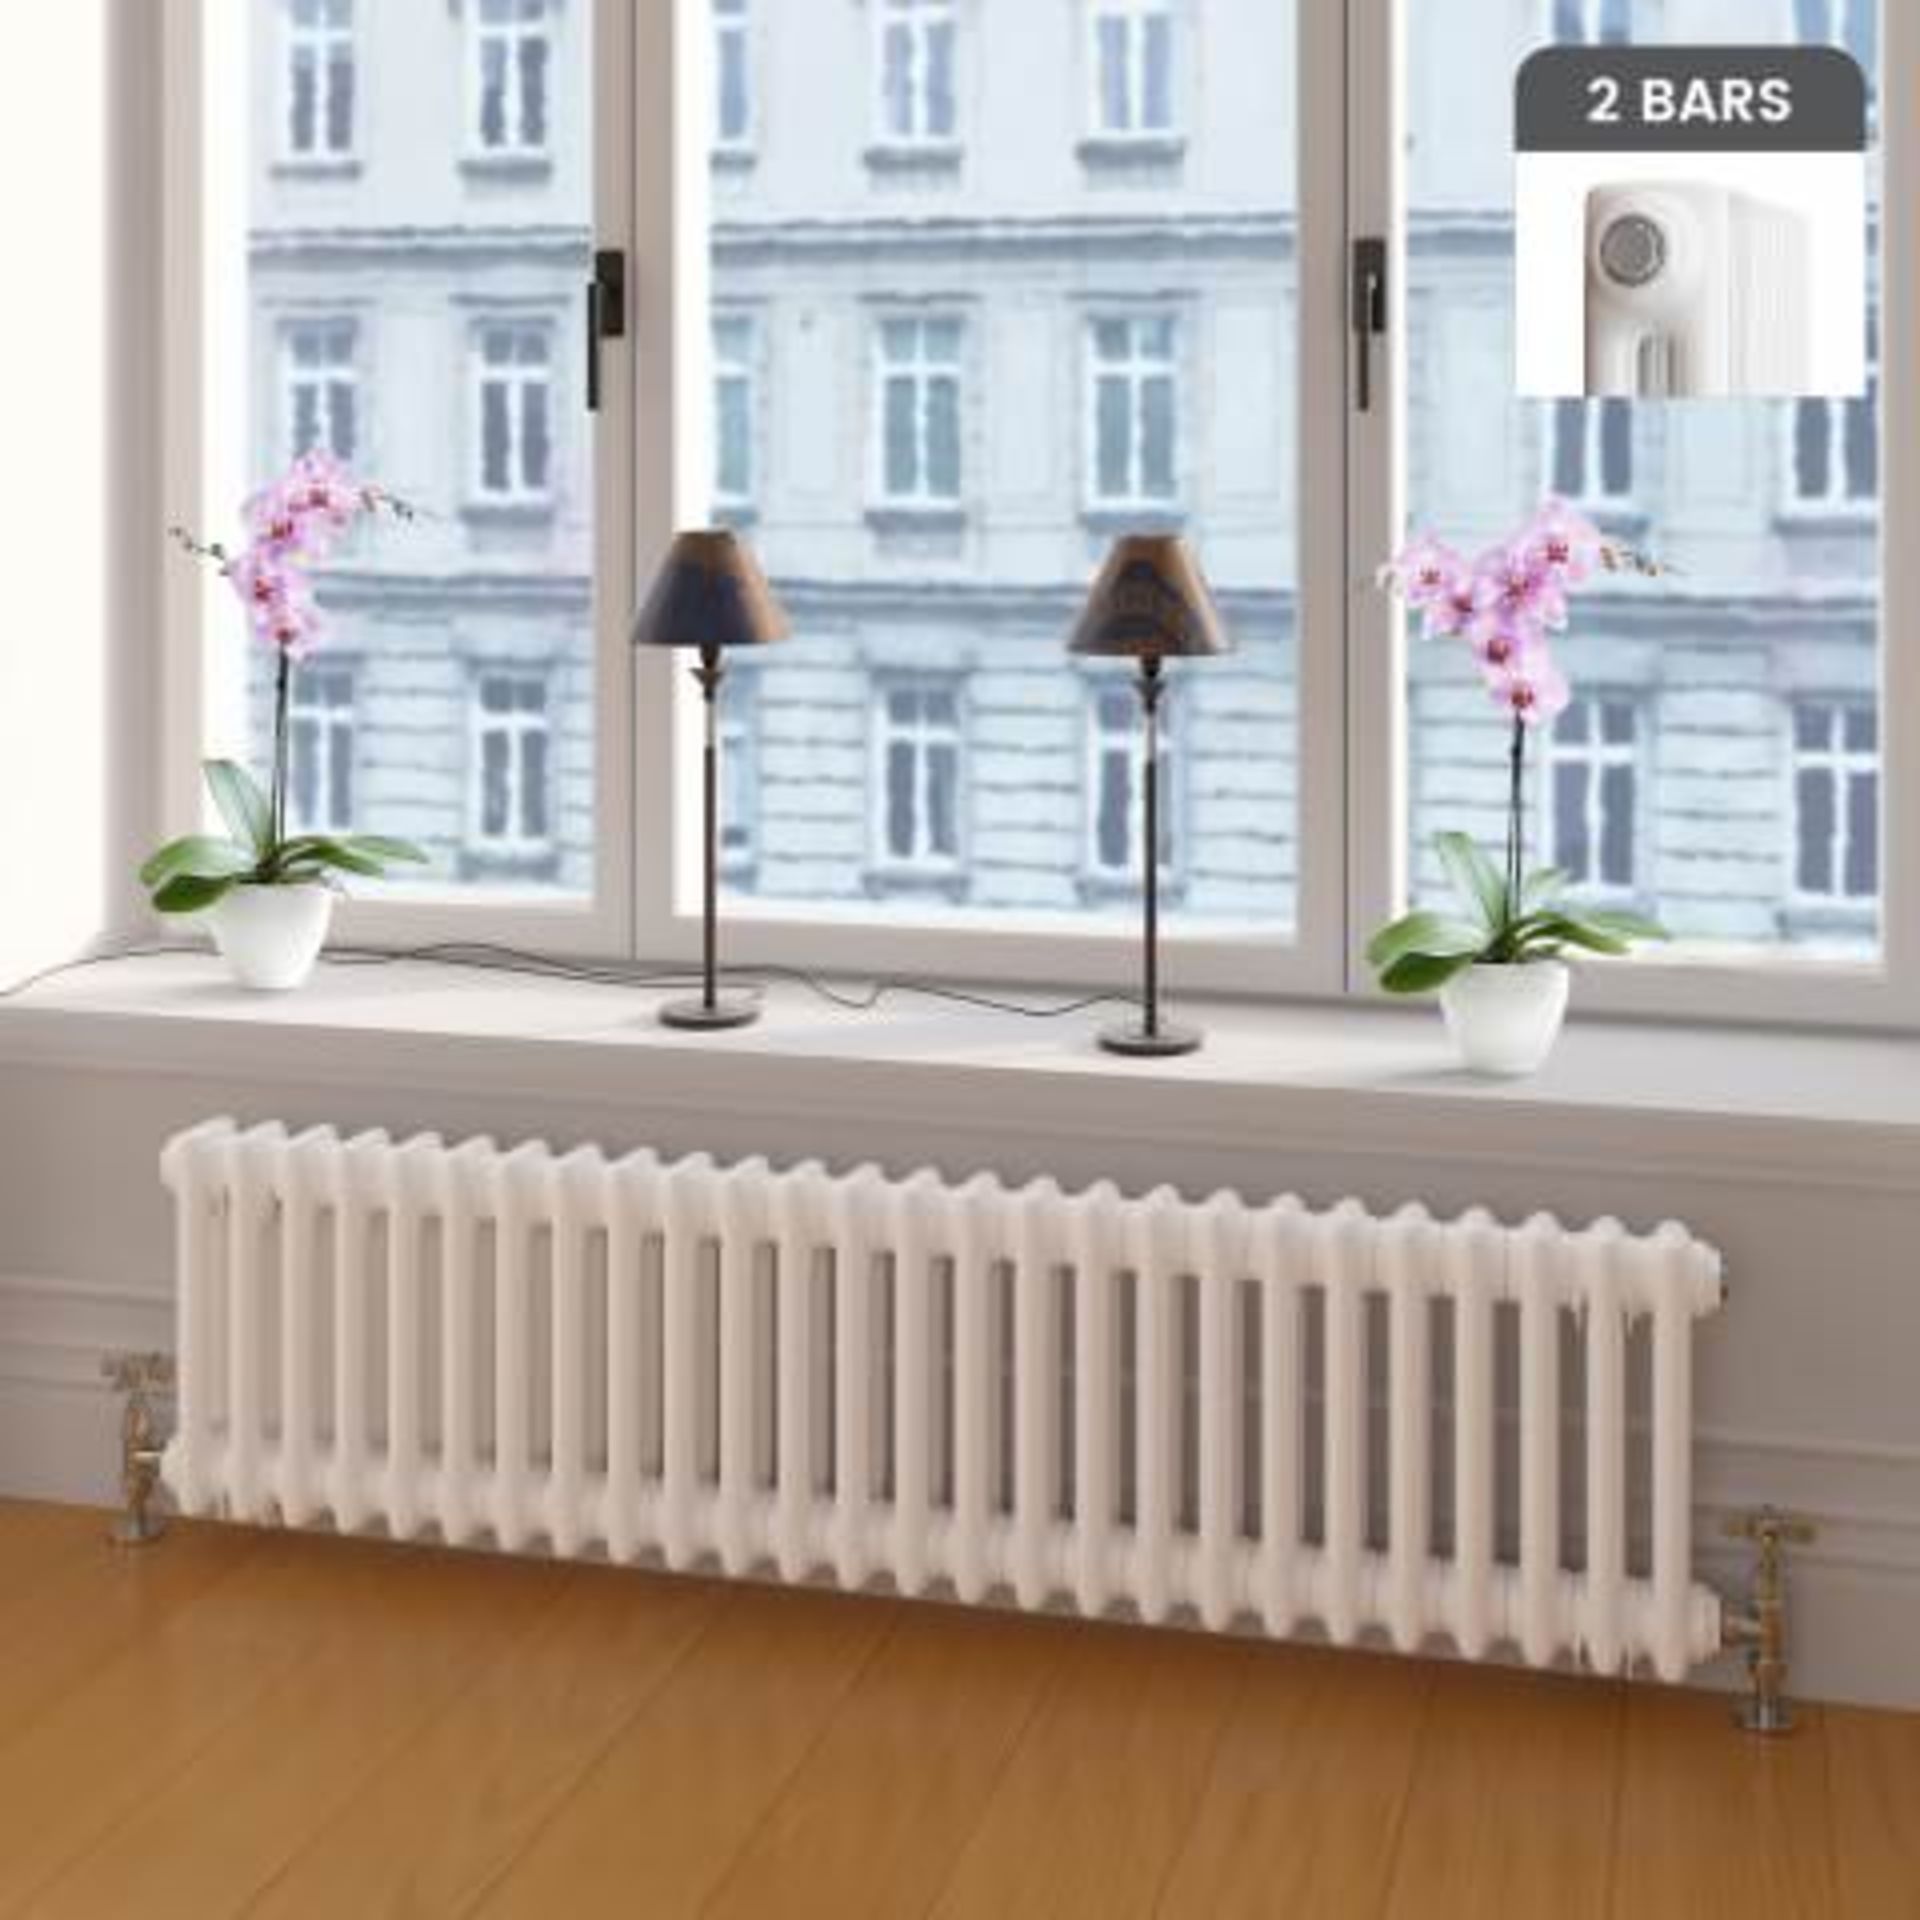 (Y10) 300x1165mm White Double Panel Horizontal Colosseum Traditional Radiator. RRP £379.99.